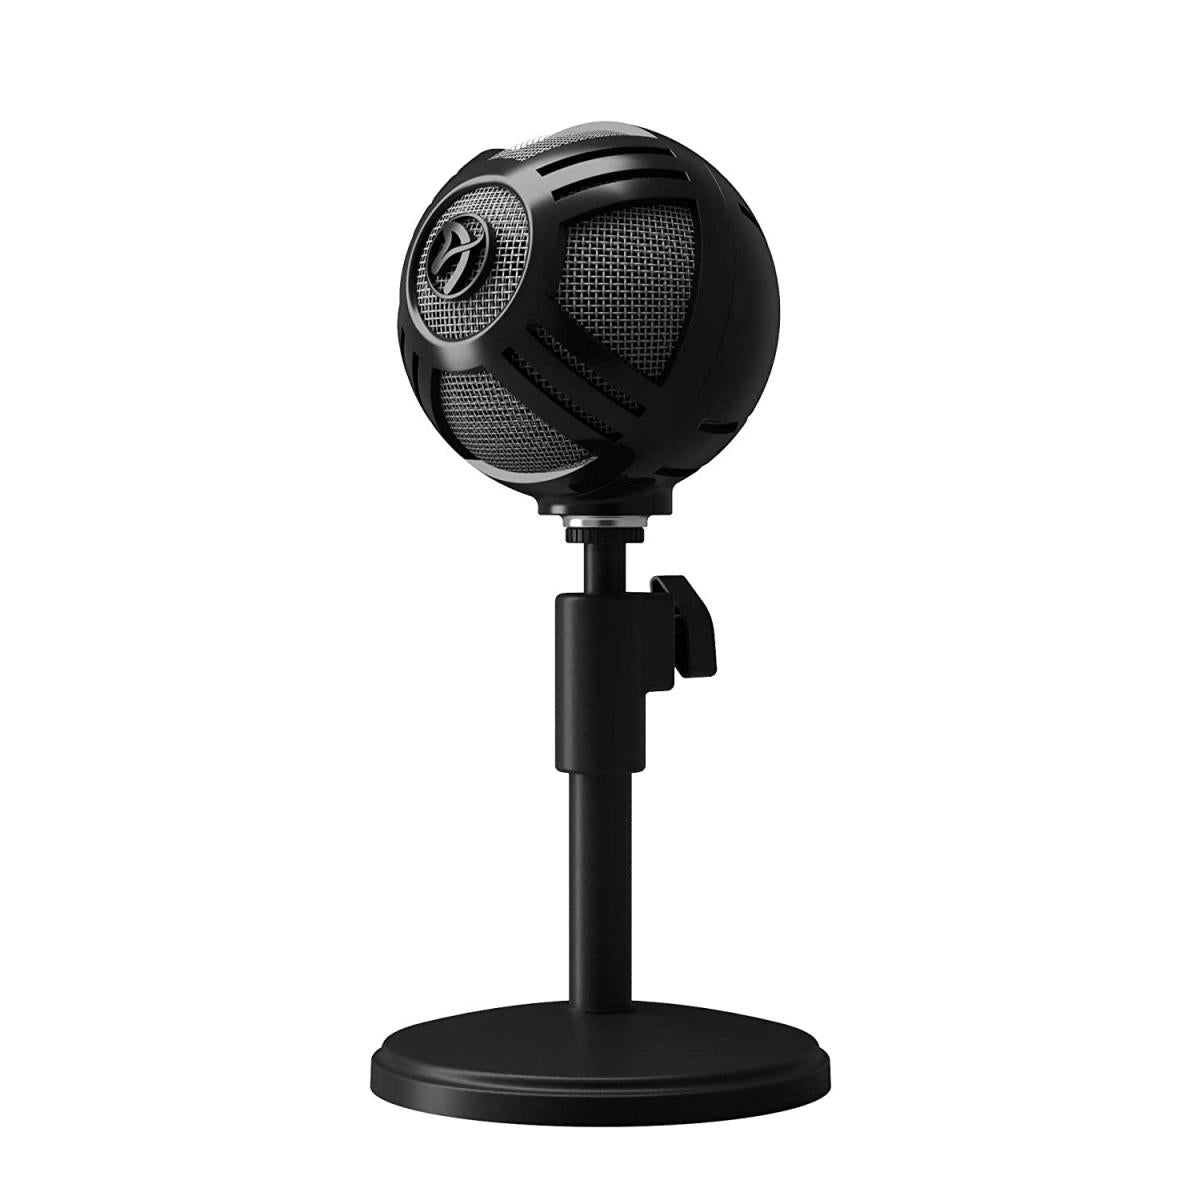 Arozzi Sfera USB pro Microphone for Gaming & Streaming, Black